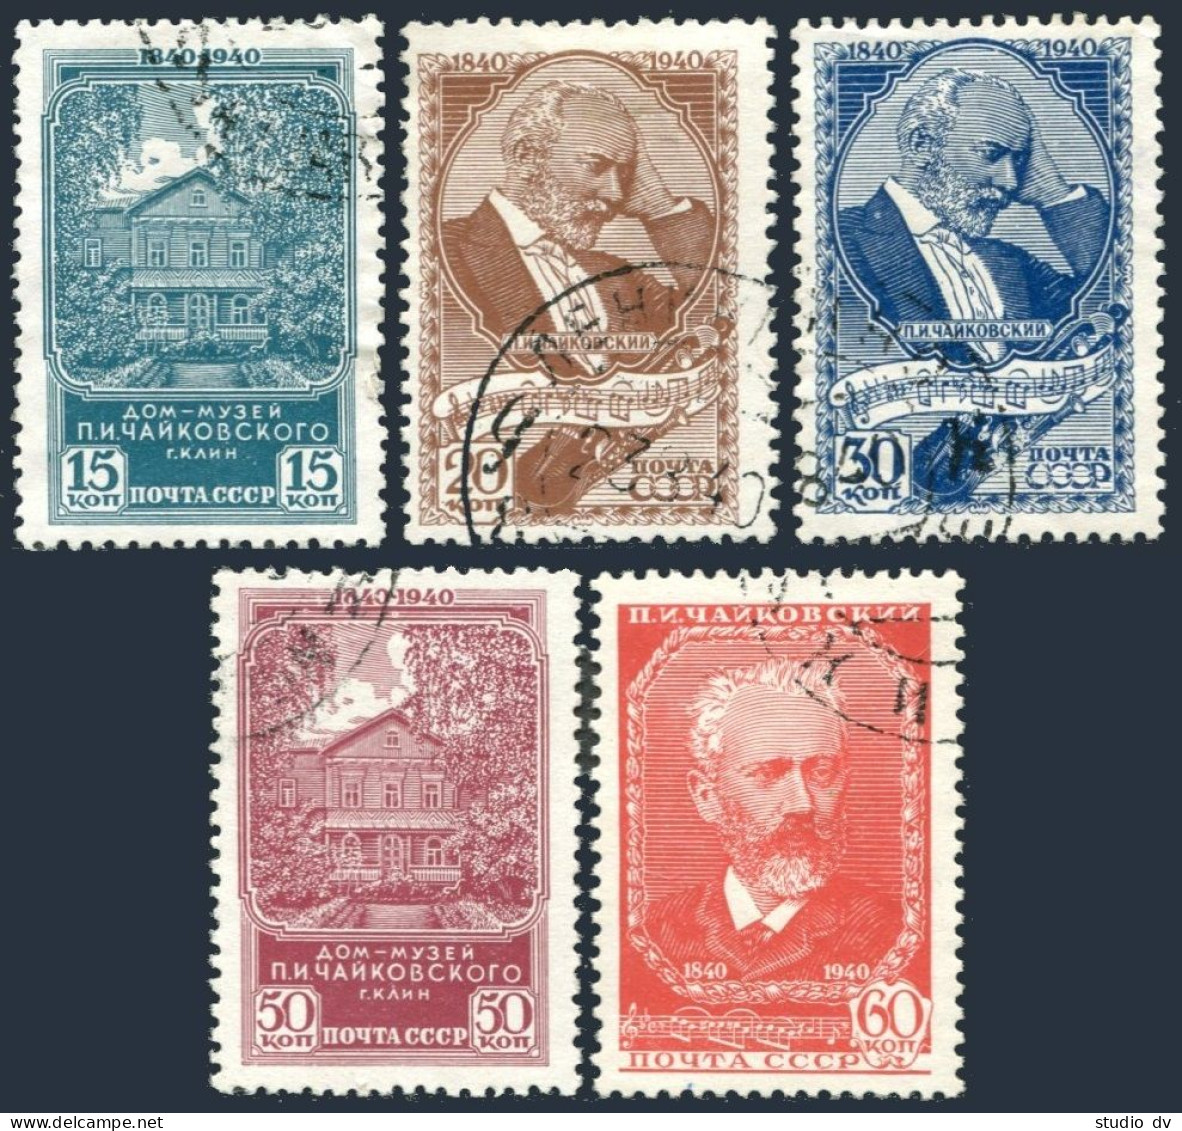 Russia 789-793, CTO. Michel 758-762. Petr Ilich Tchaikovsky, Composer, 1940. - Used Stamps